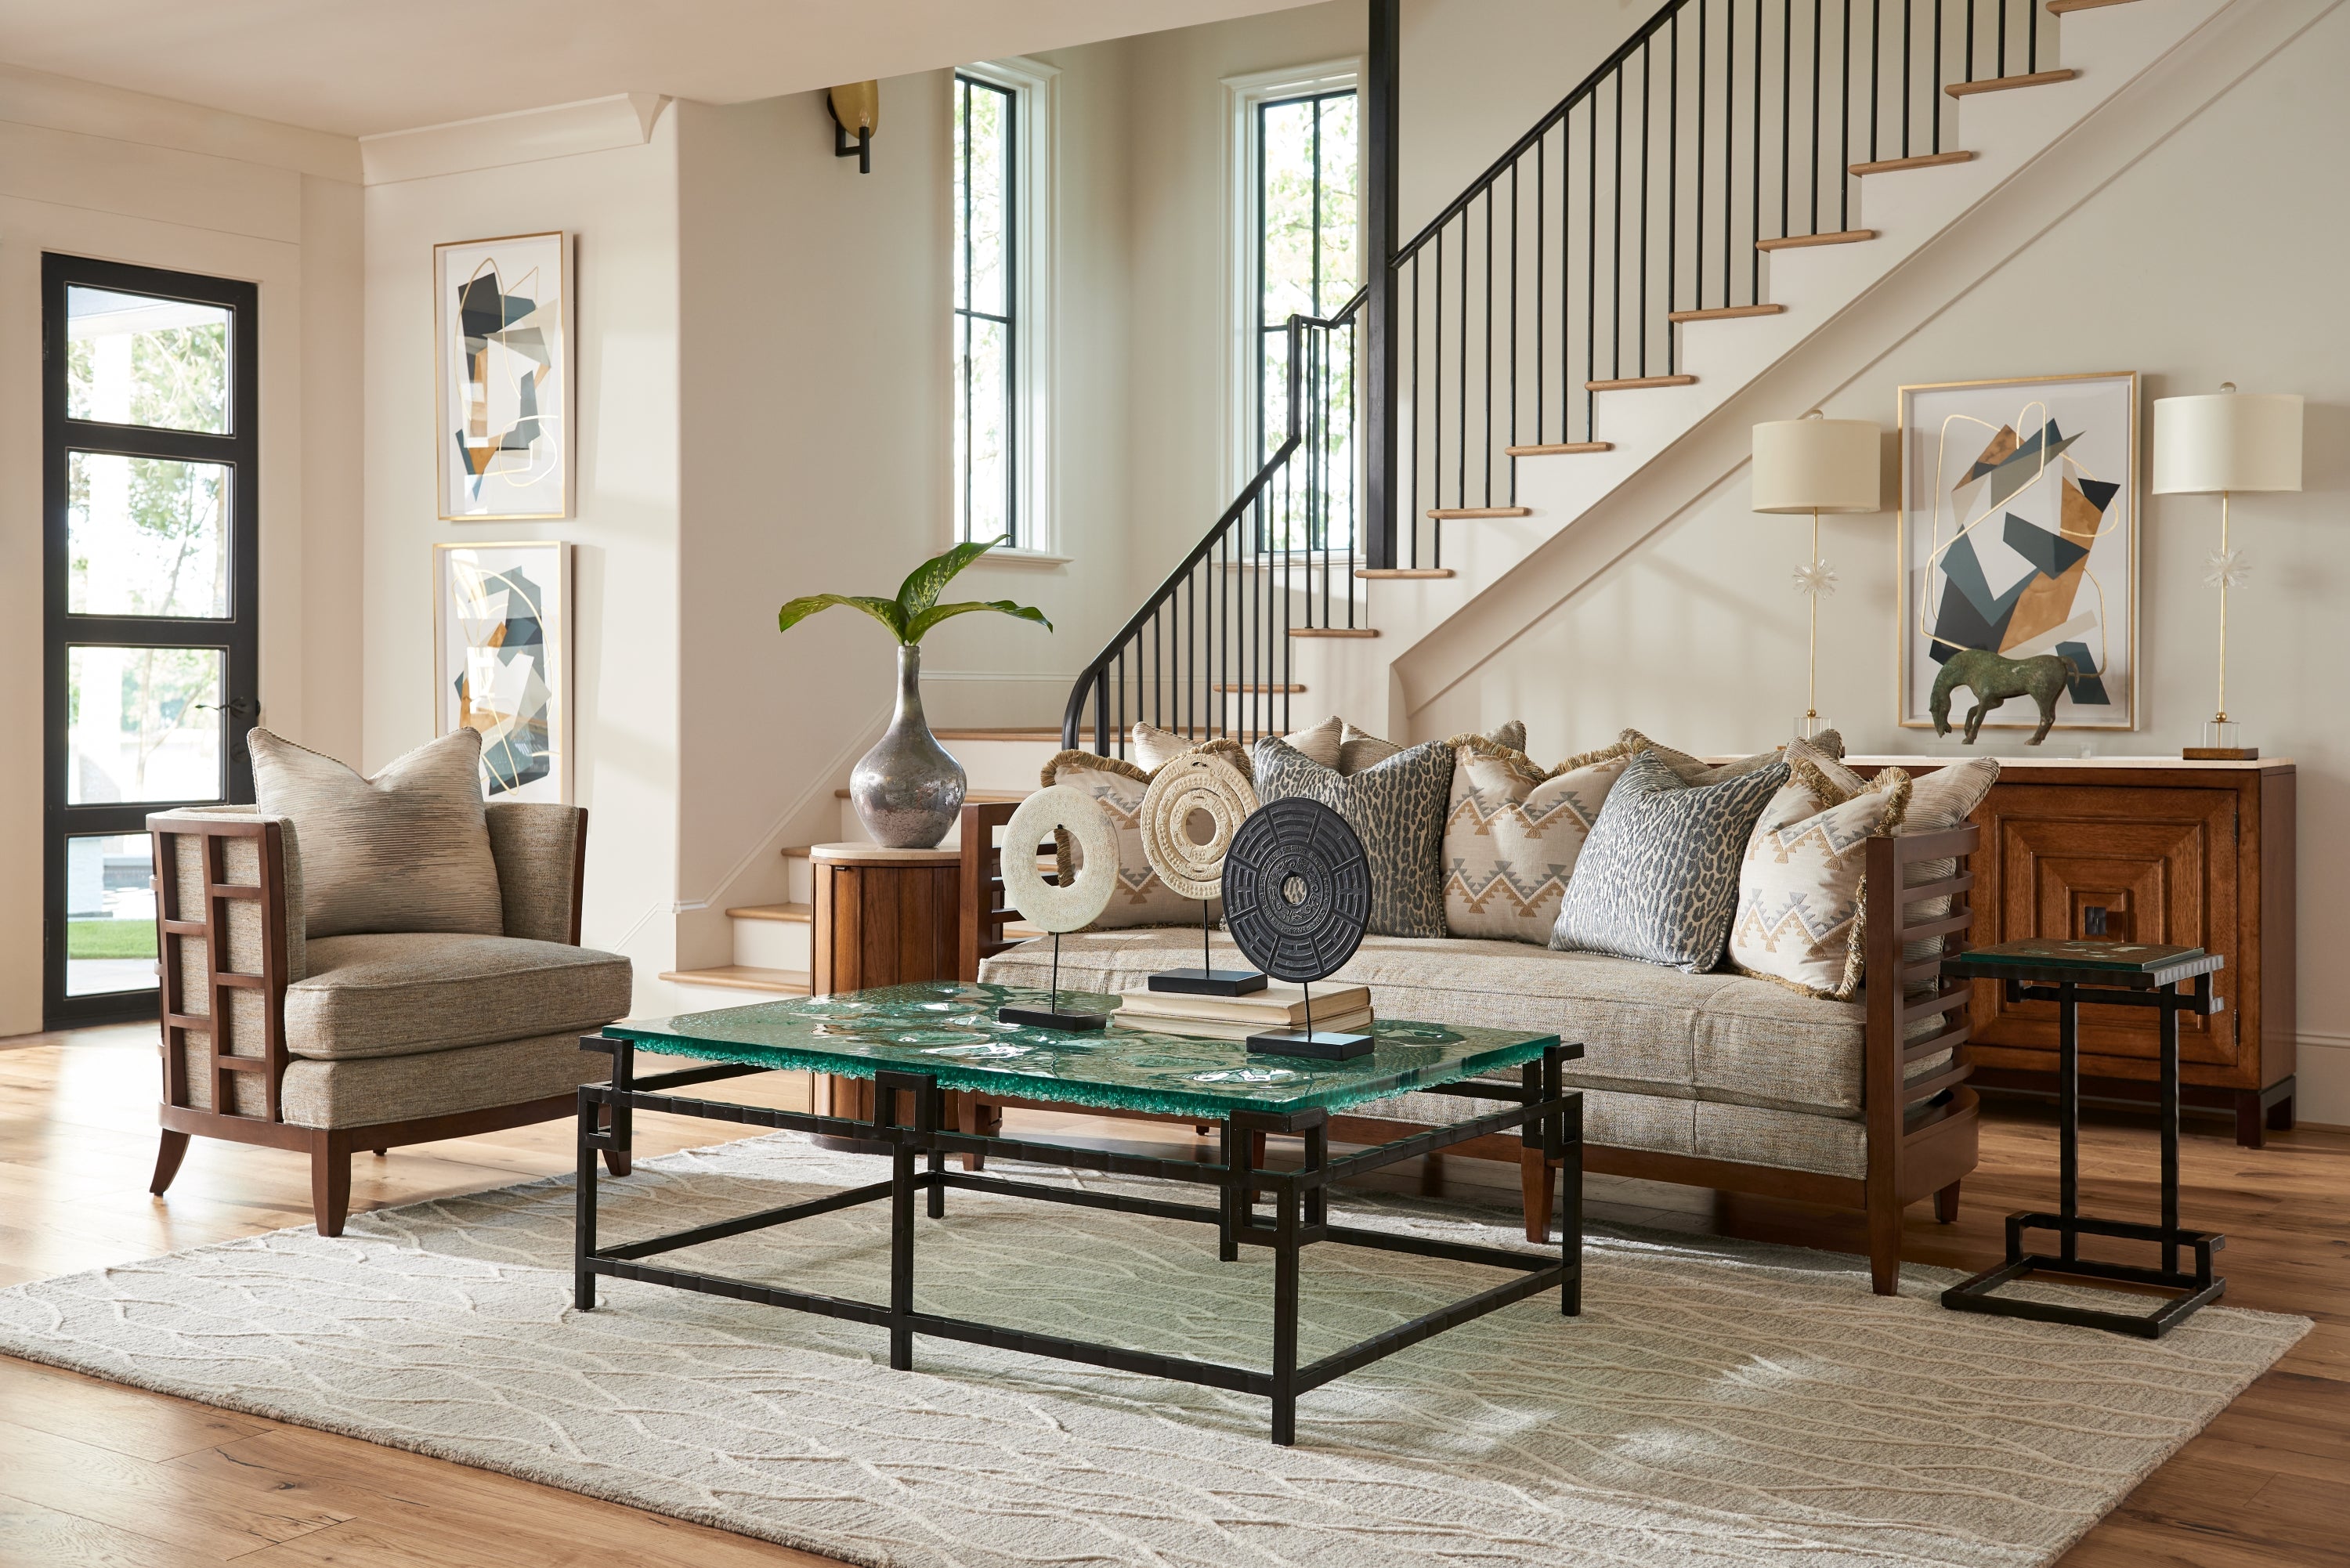 Living room scene from Tommy Bahama Home featuring a wood and fabric sofa and arm chair with a metal and glass cocktail table.